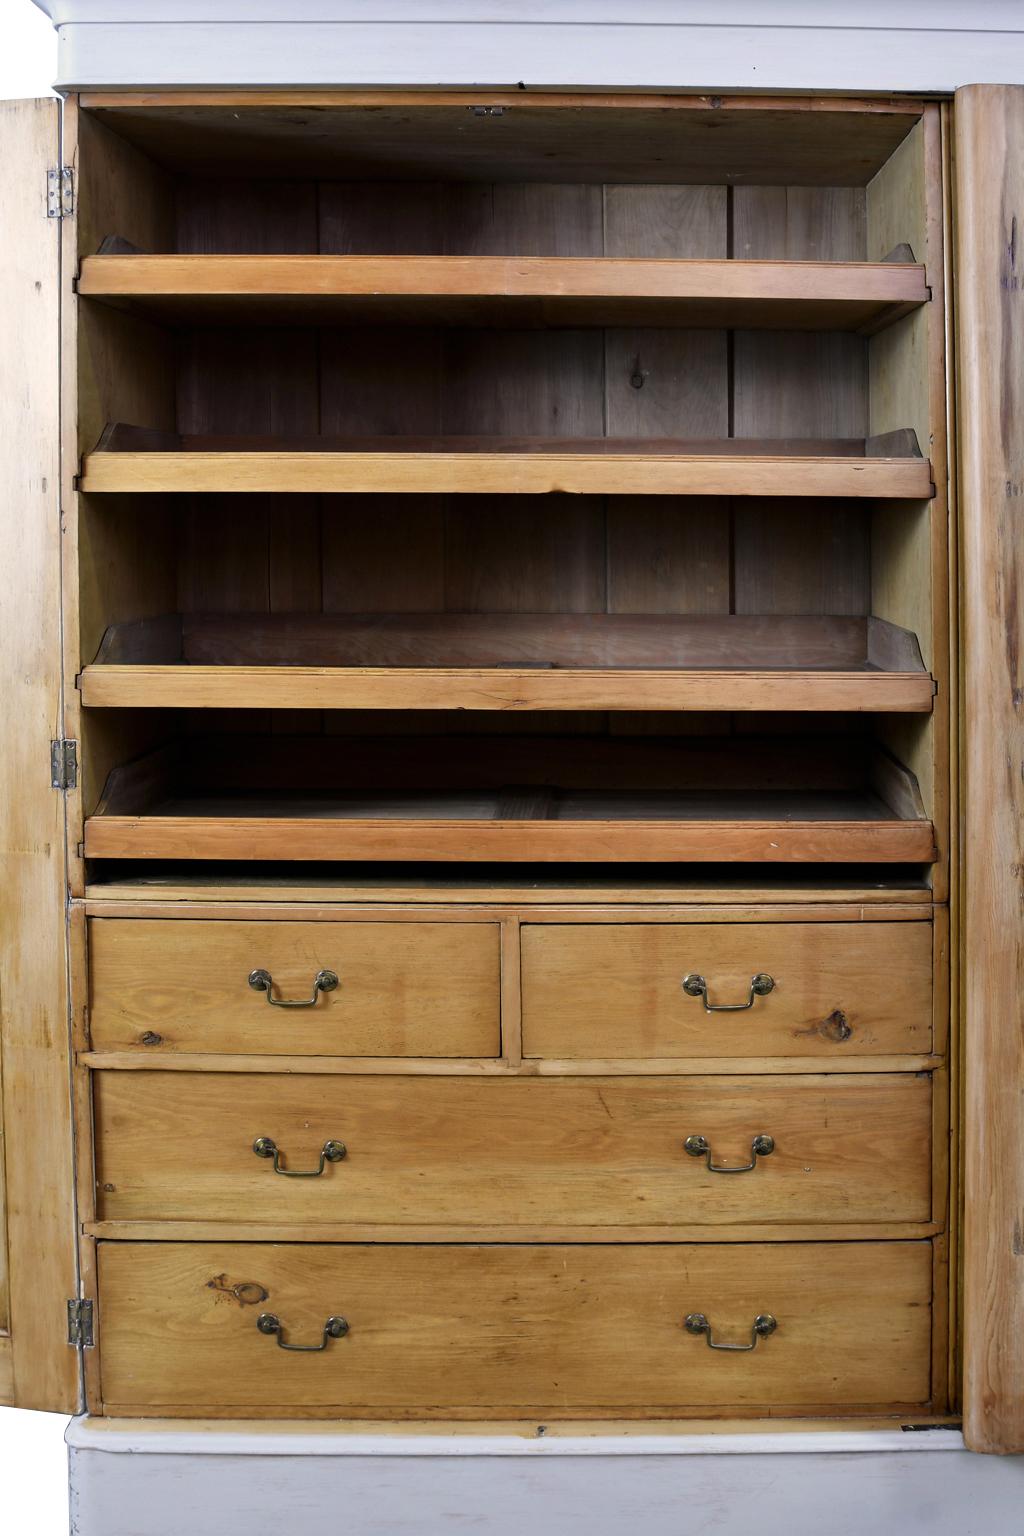 armoire with drawers inside